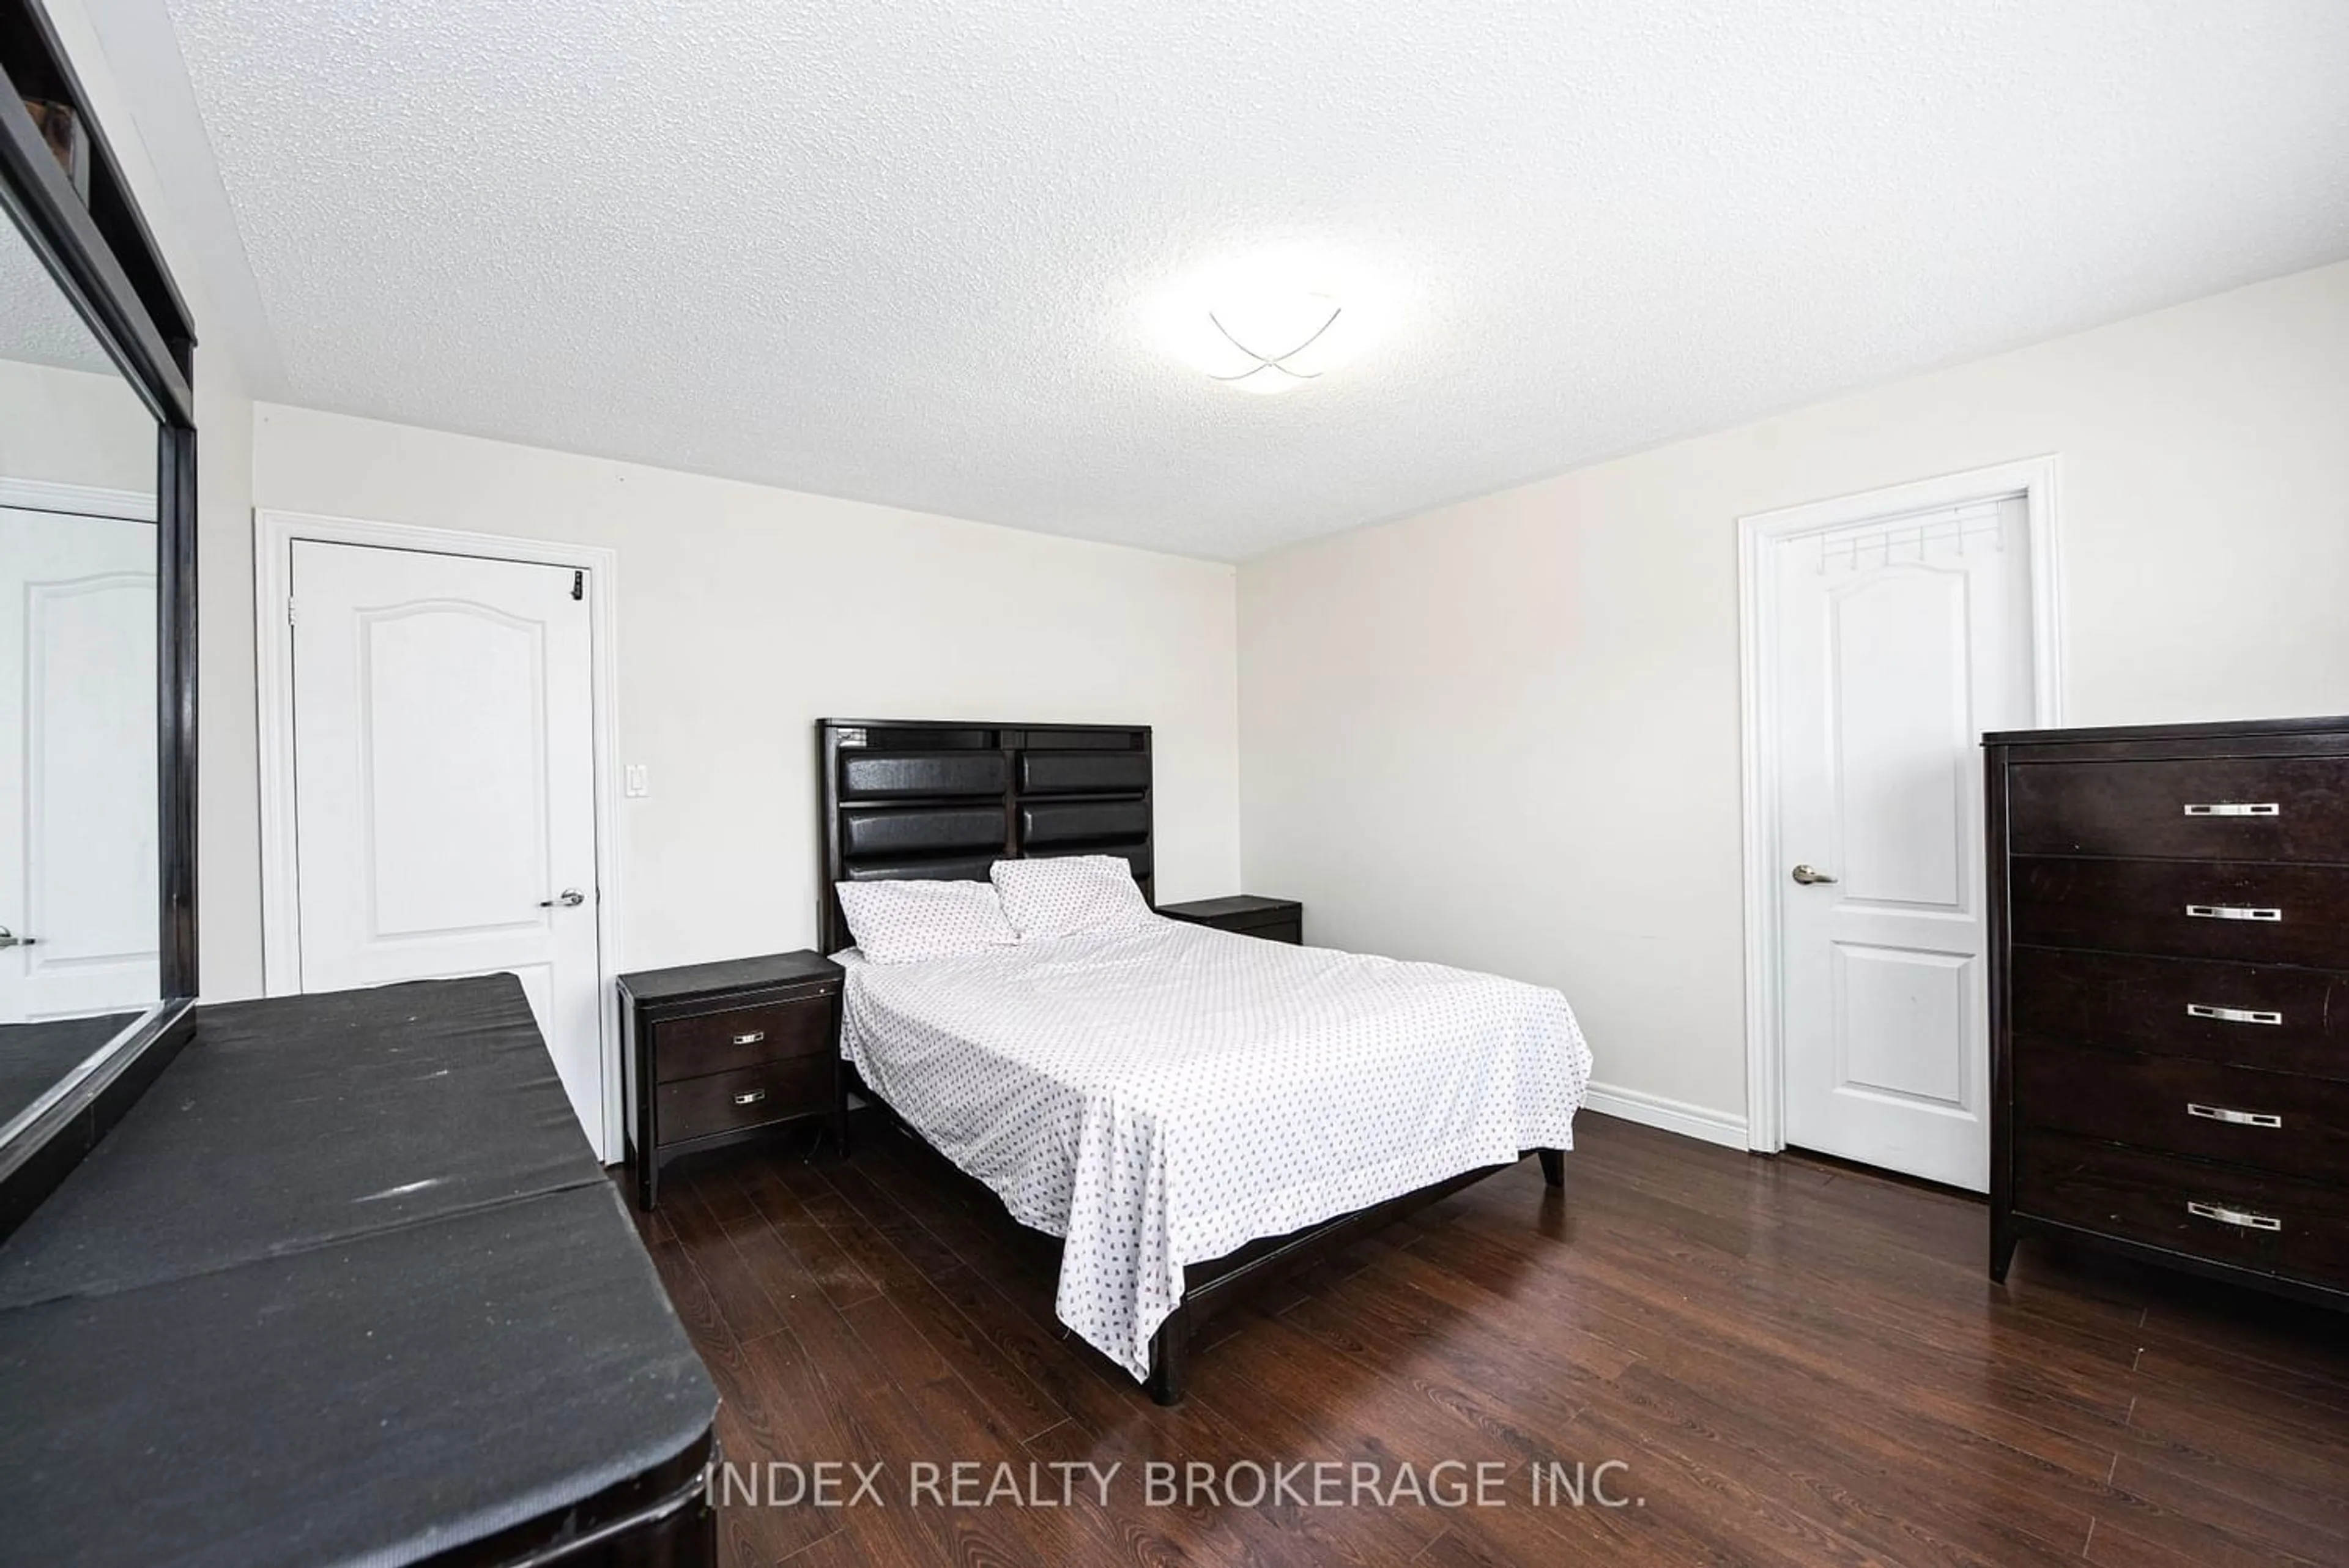 A pic of a room for 32 Charger Lane, Brampton Ontario L7A 3C1